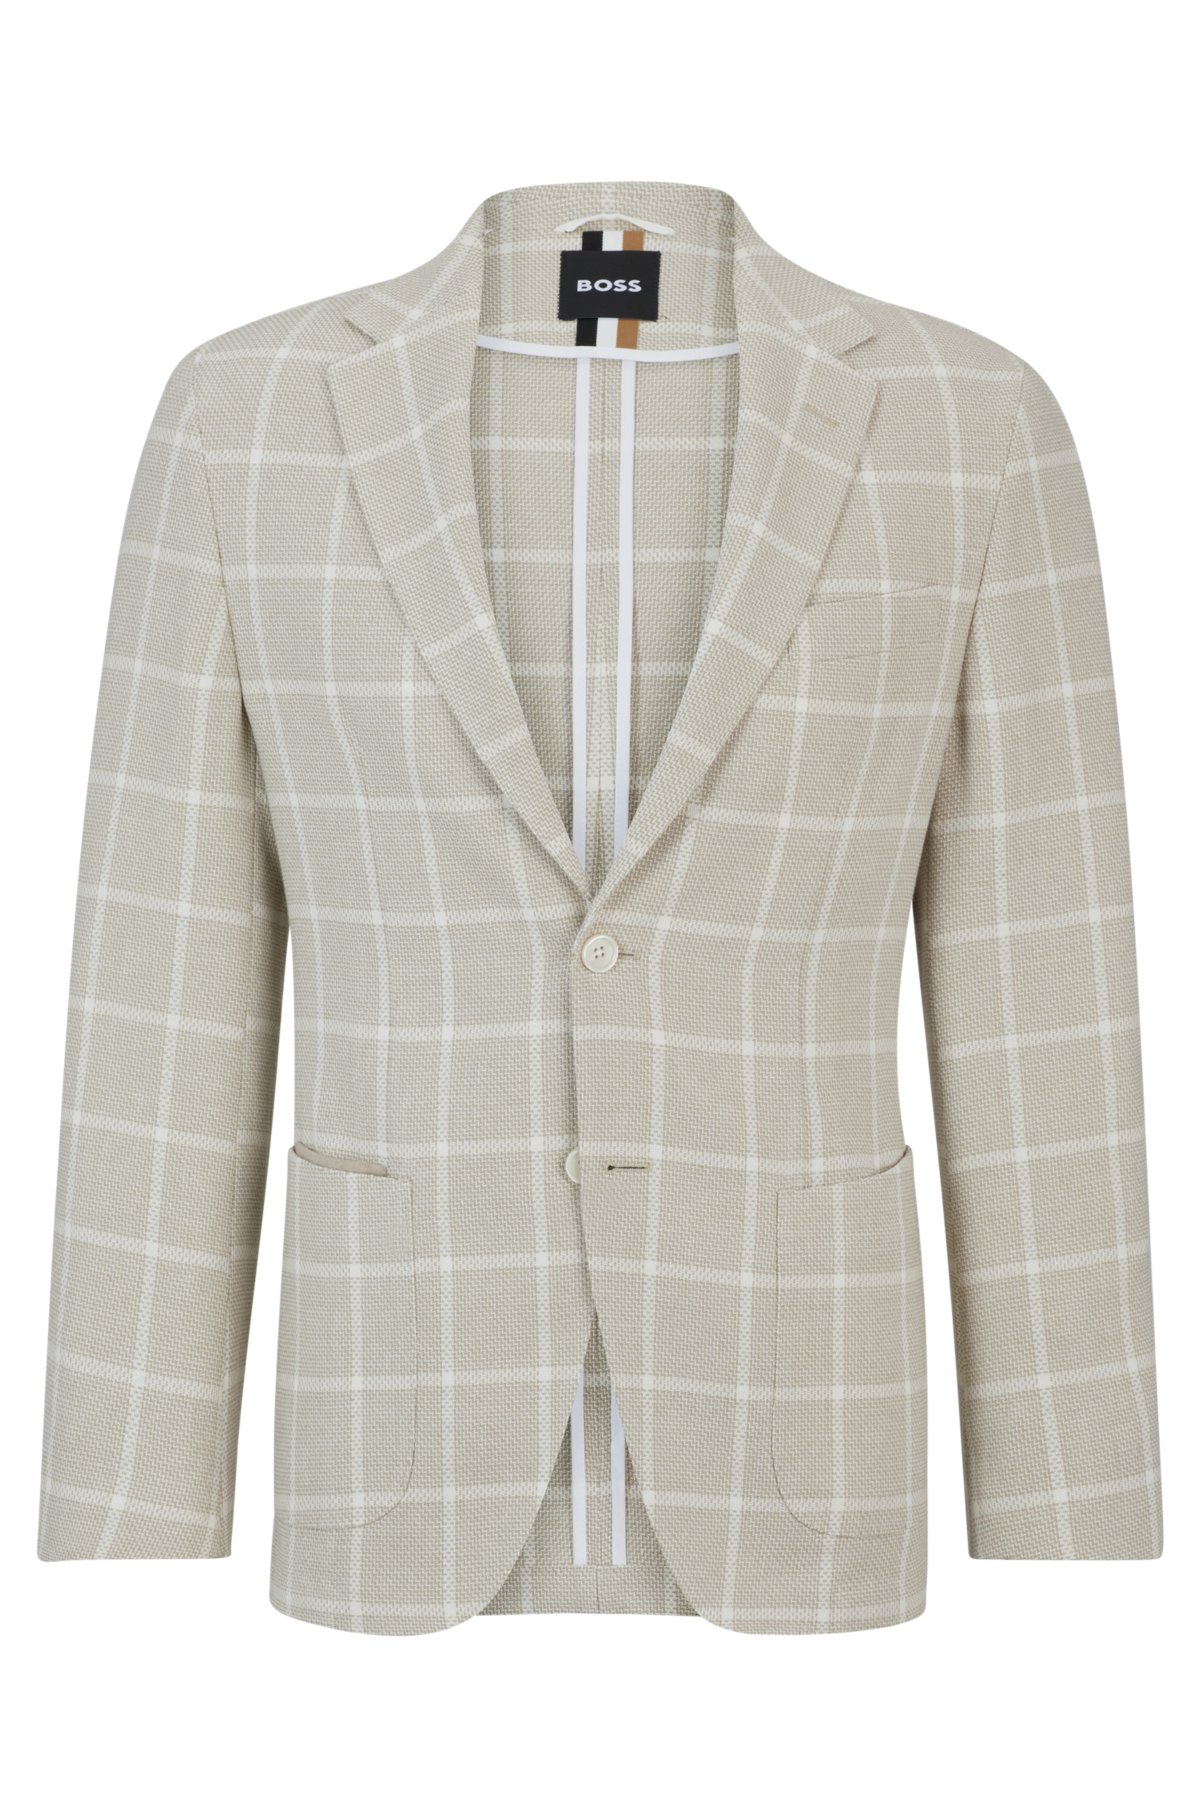 Regular-fit jacket in a checked cotton blend, White